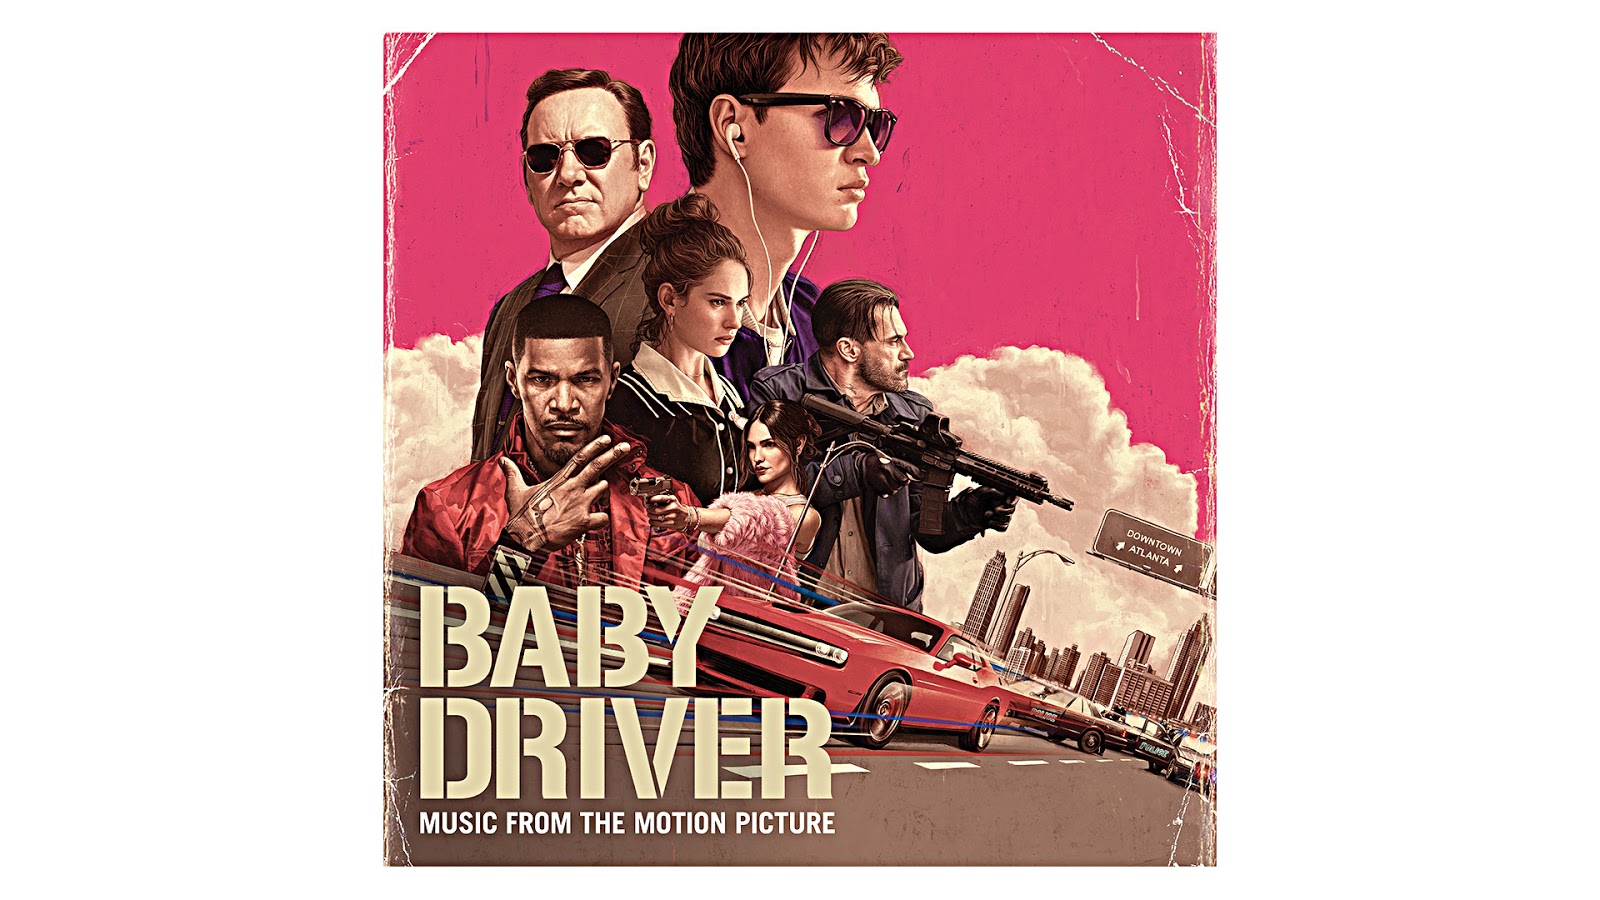 baby driver full movie free online hd